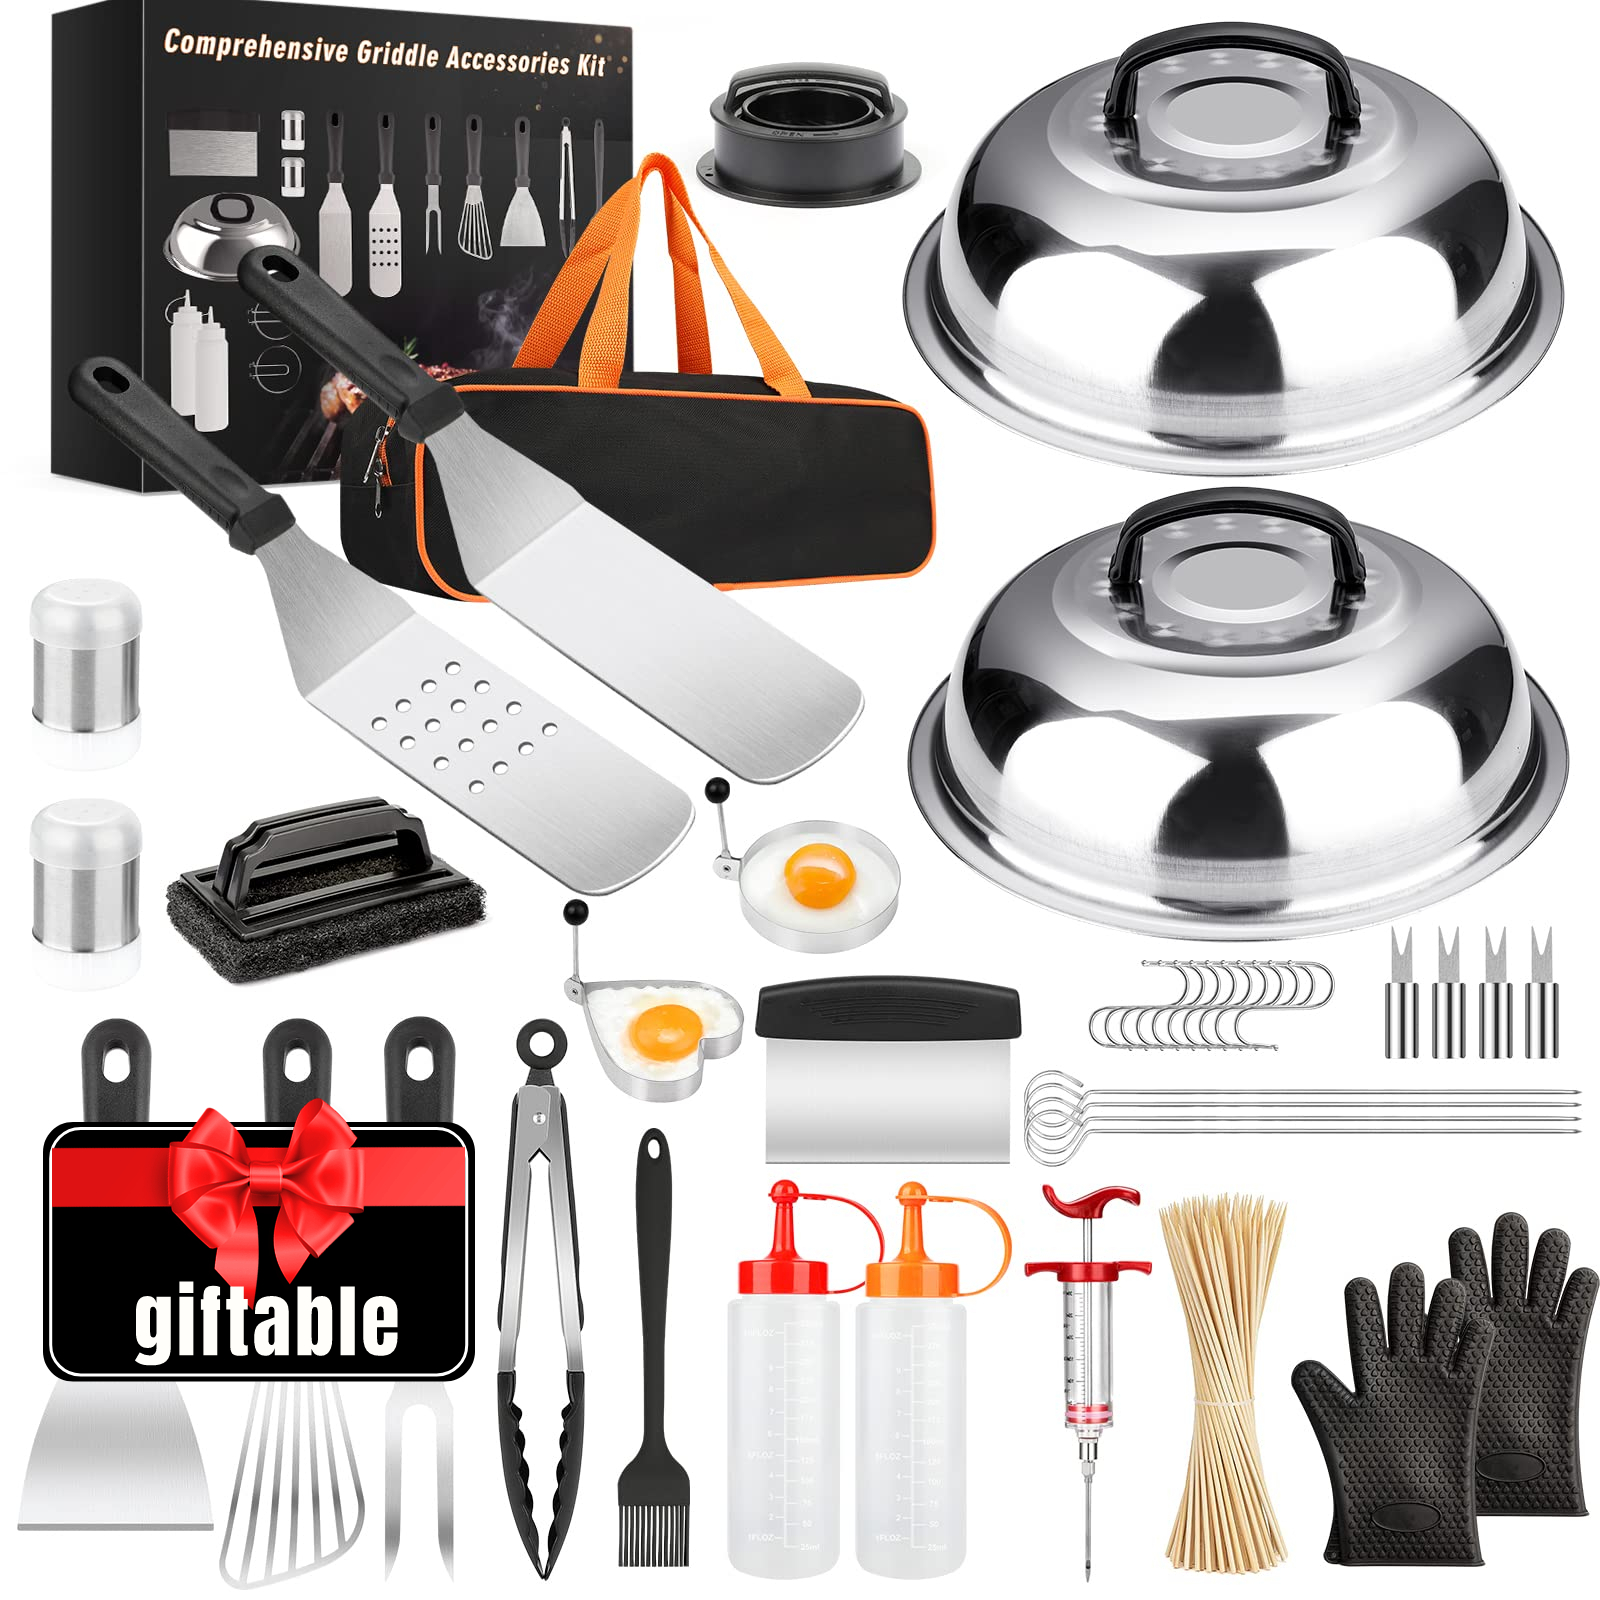 Griddle Accessories Kit 140 Pcs for Blackstone Camp Chef Professional Griddle Grill BBQ Spatula - image 1 of 8